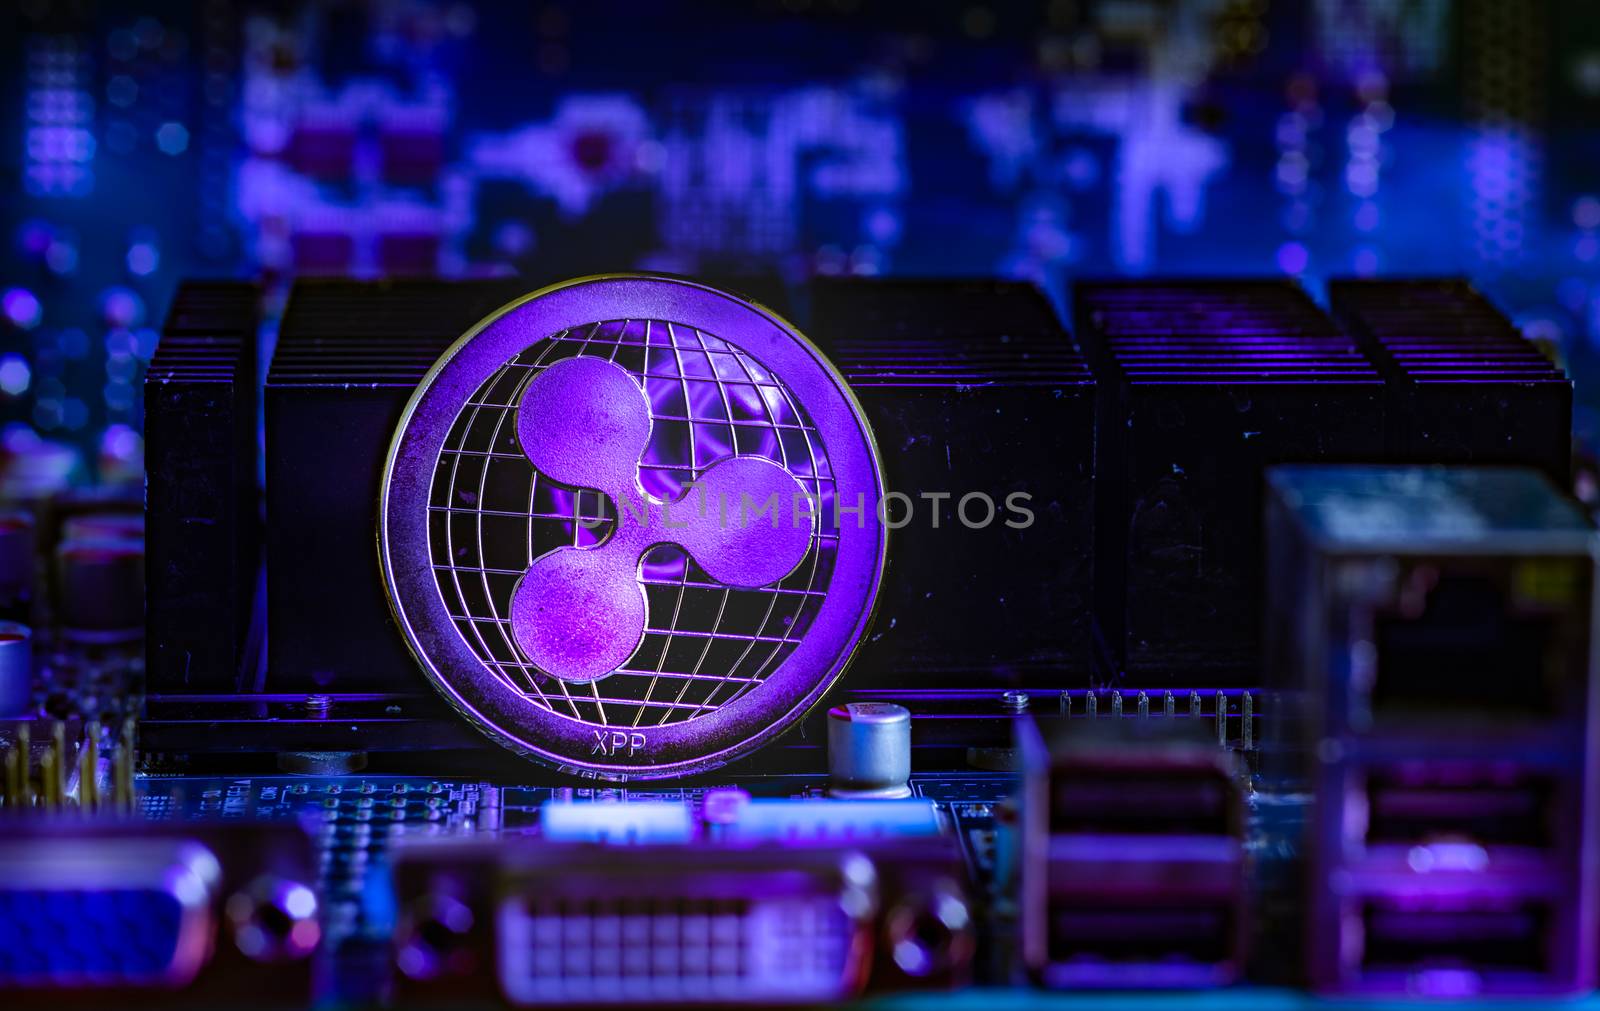 Front view of Ripple(XRP) cryptocurrency over computer video card.Bitcoin mining farm concept.